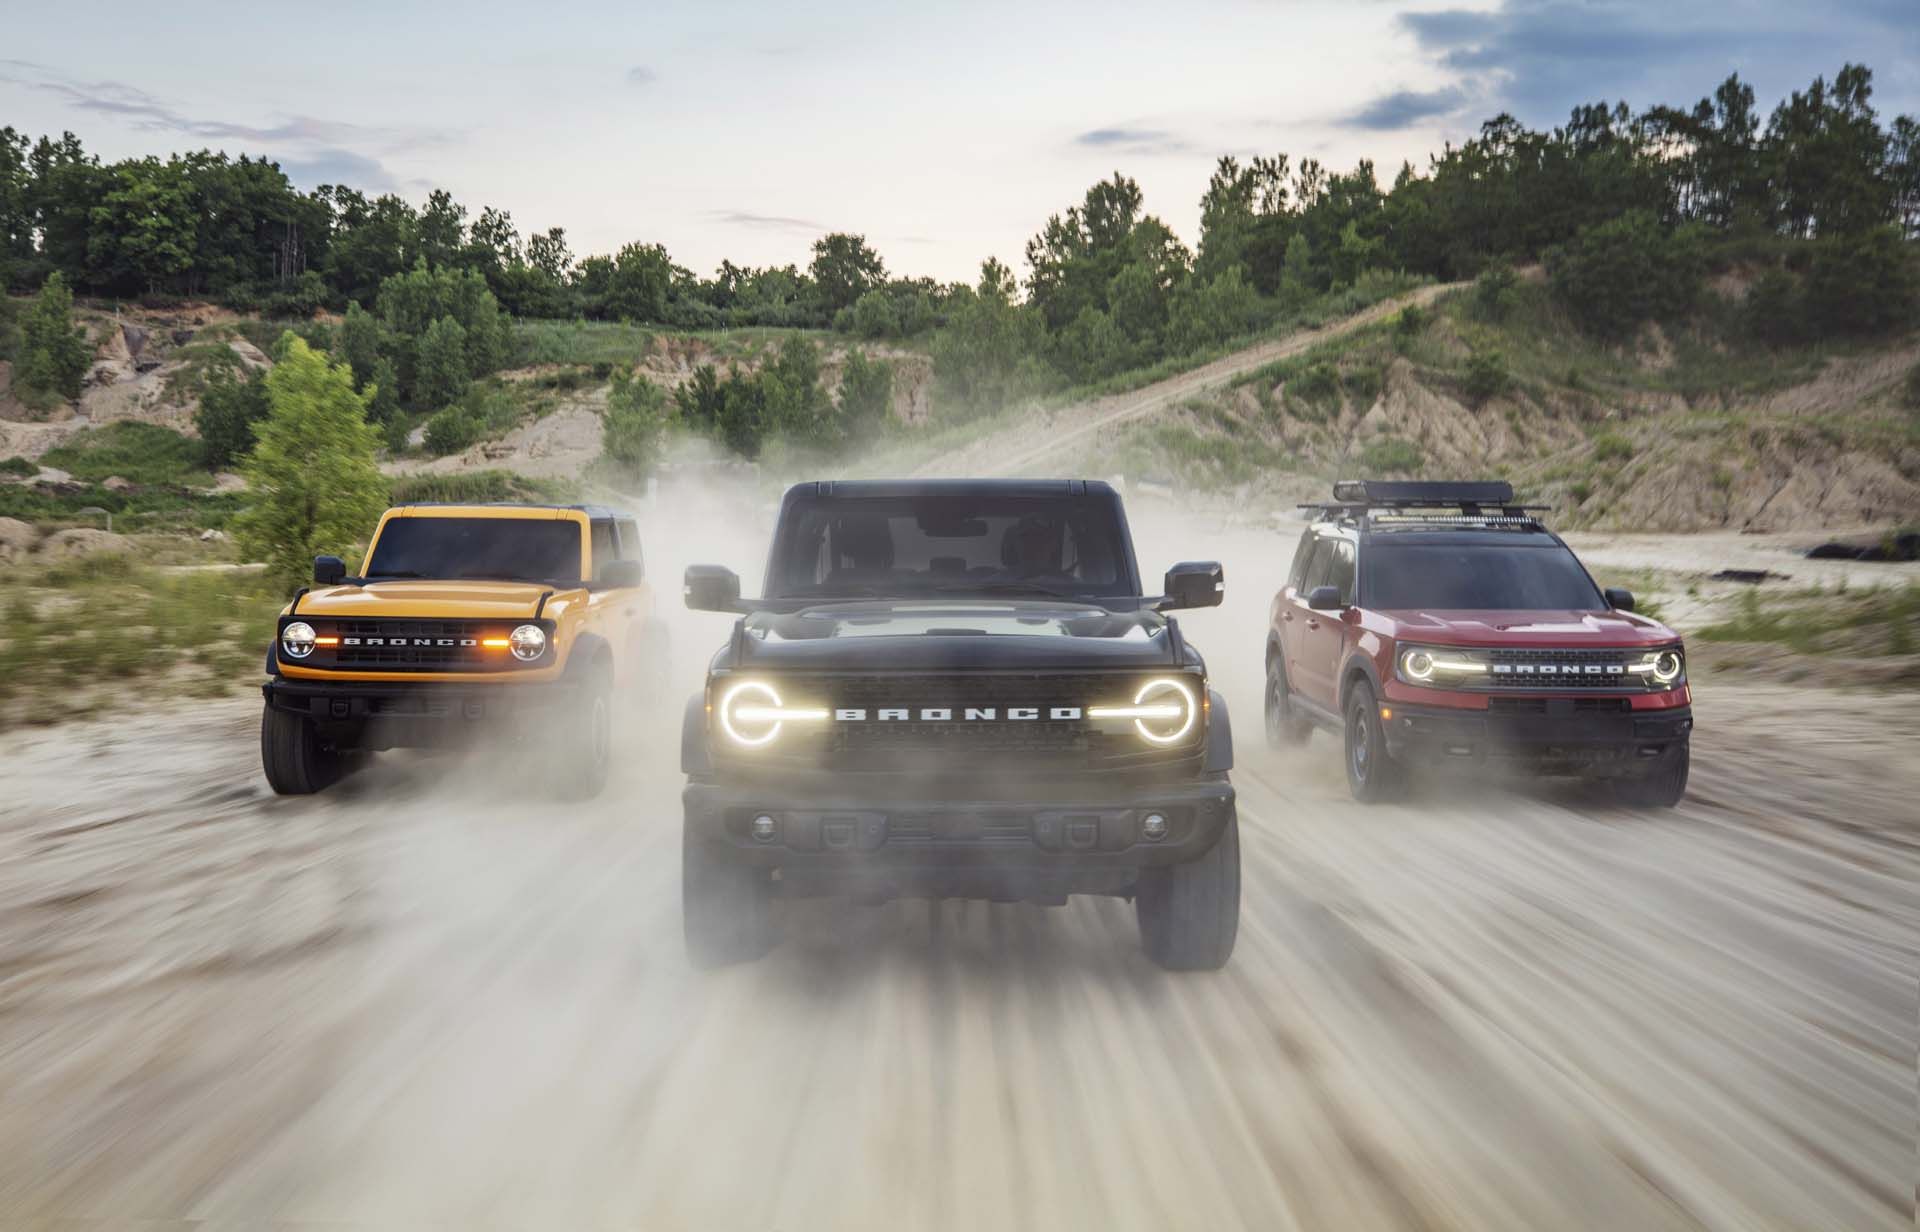 Best Bronco Build Off: Our Editors Weigh In On Their Ideal SUVs